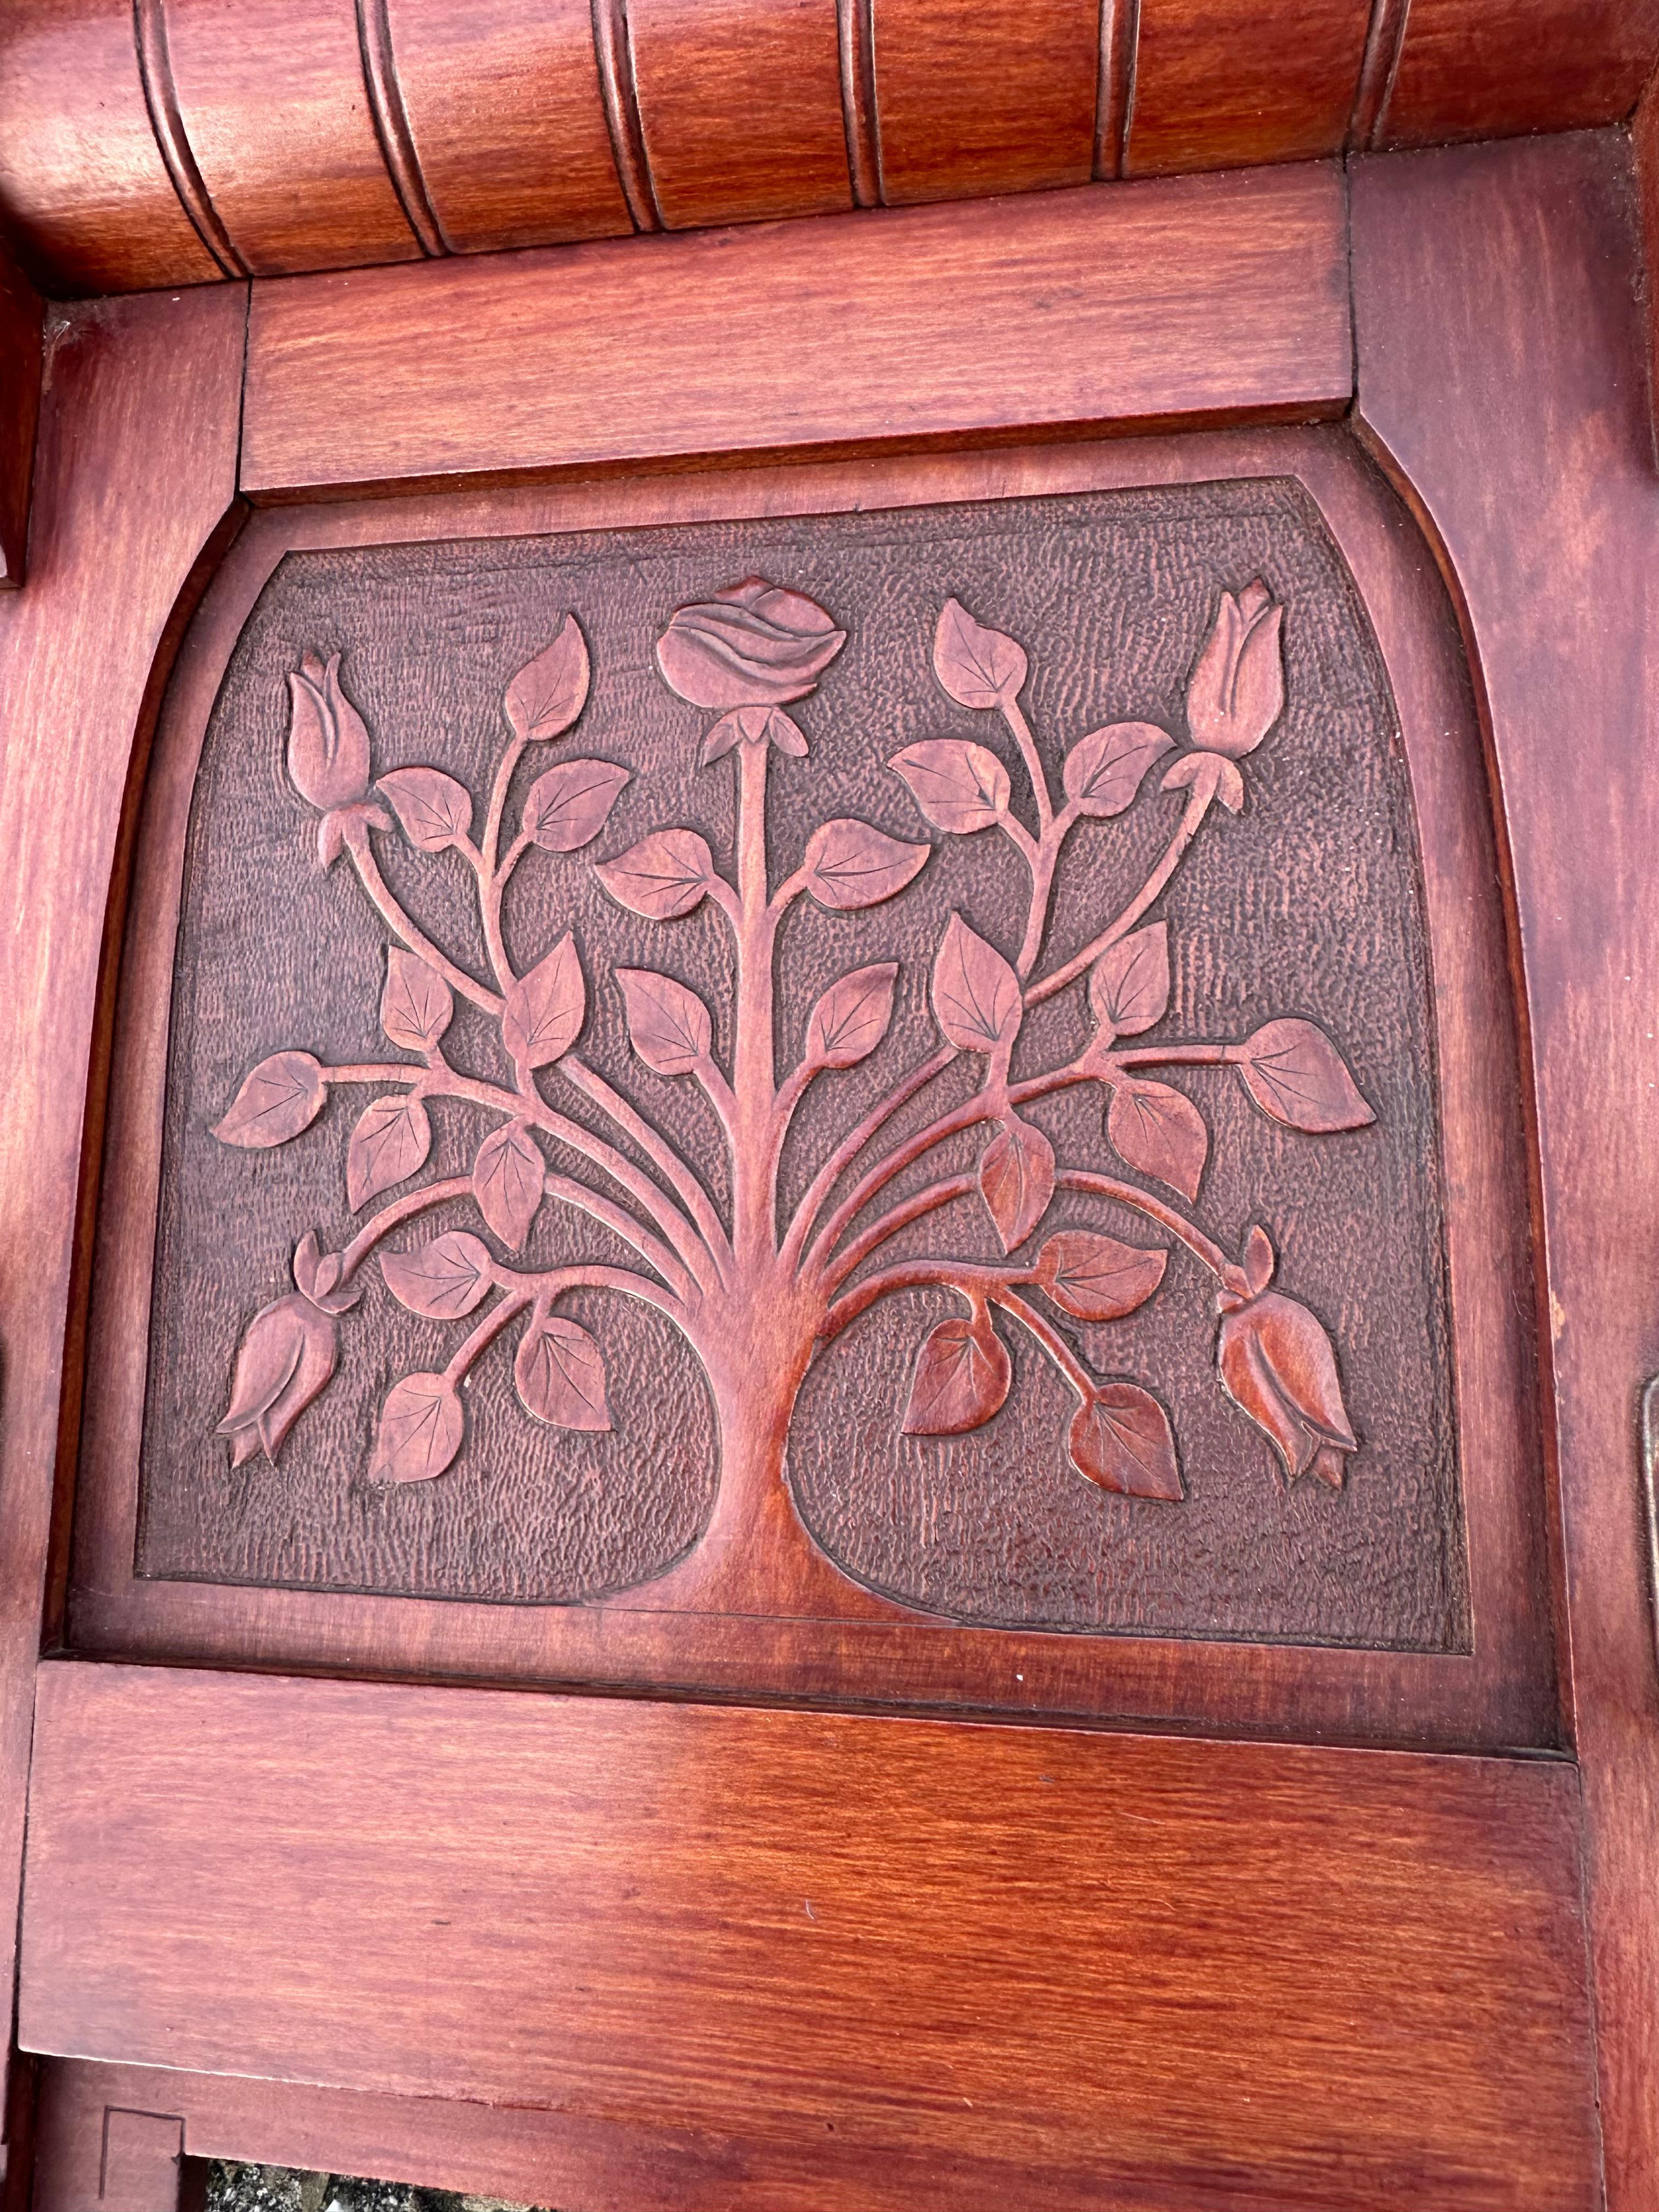 Bronze Early 1900 Arts & Crafts Coat Rack w. Carved Rose Bush Panels and Beveled Mirror For Sale